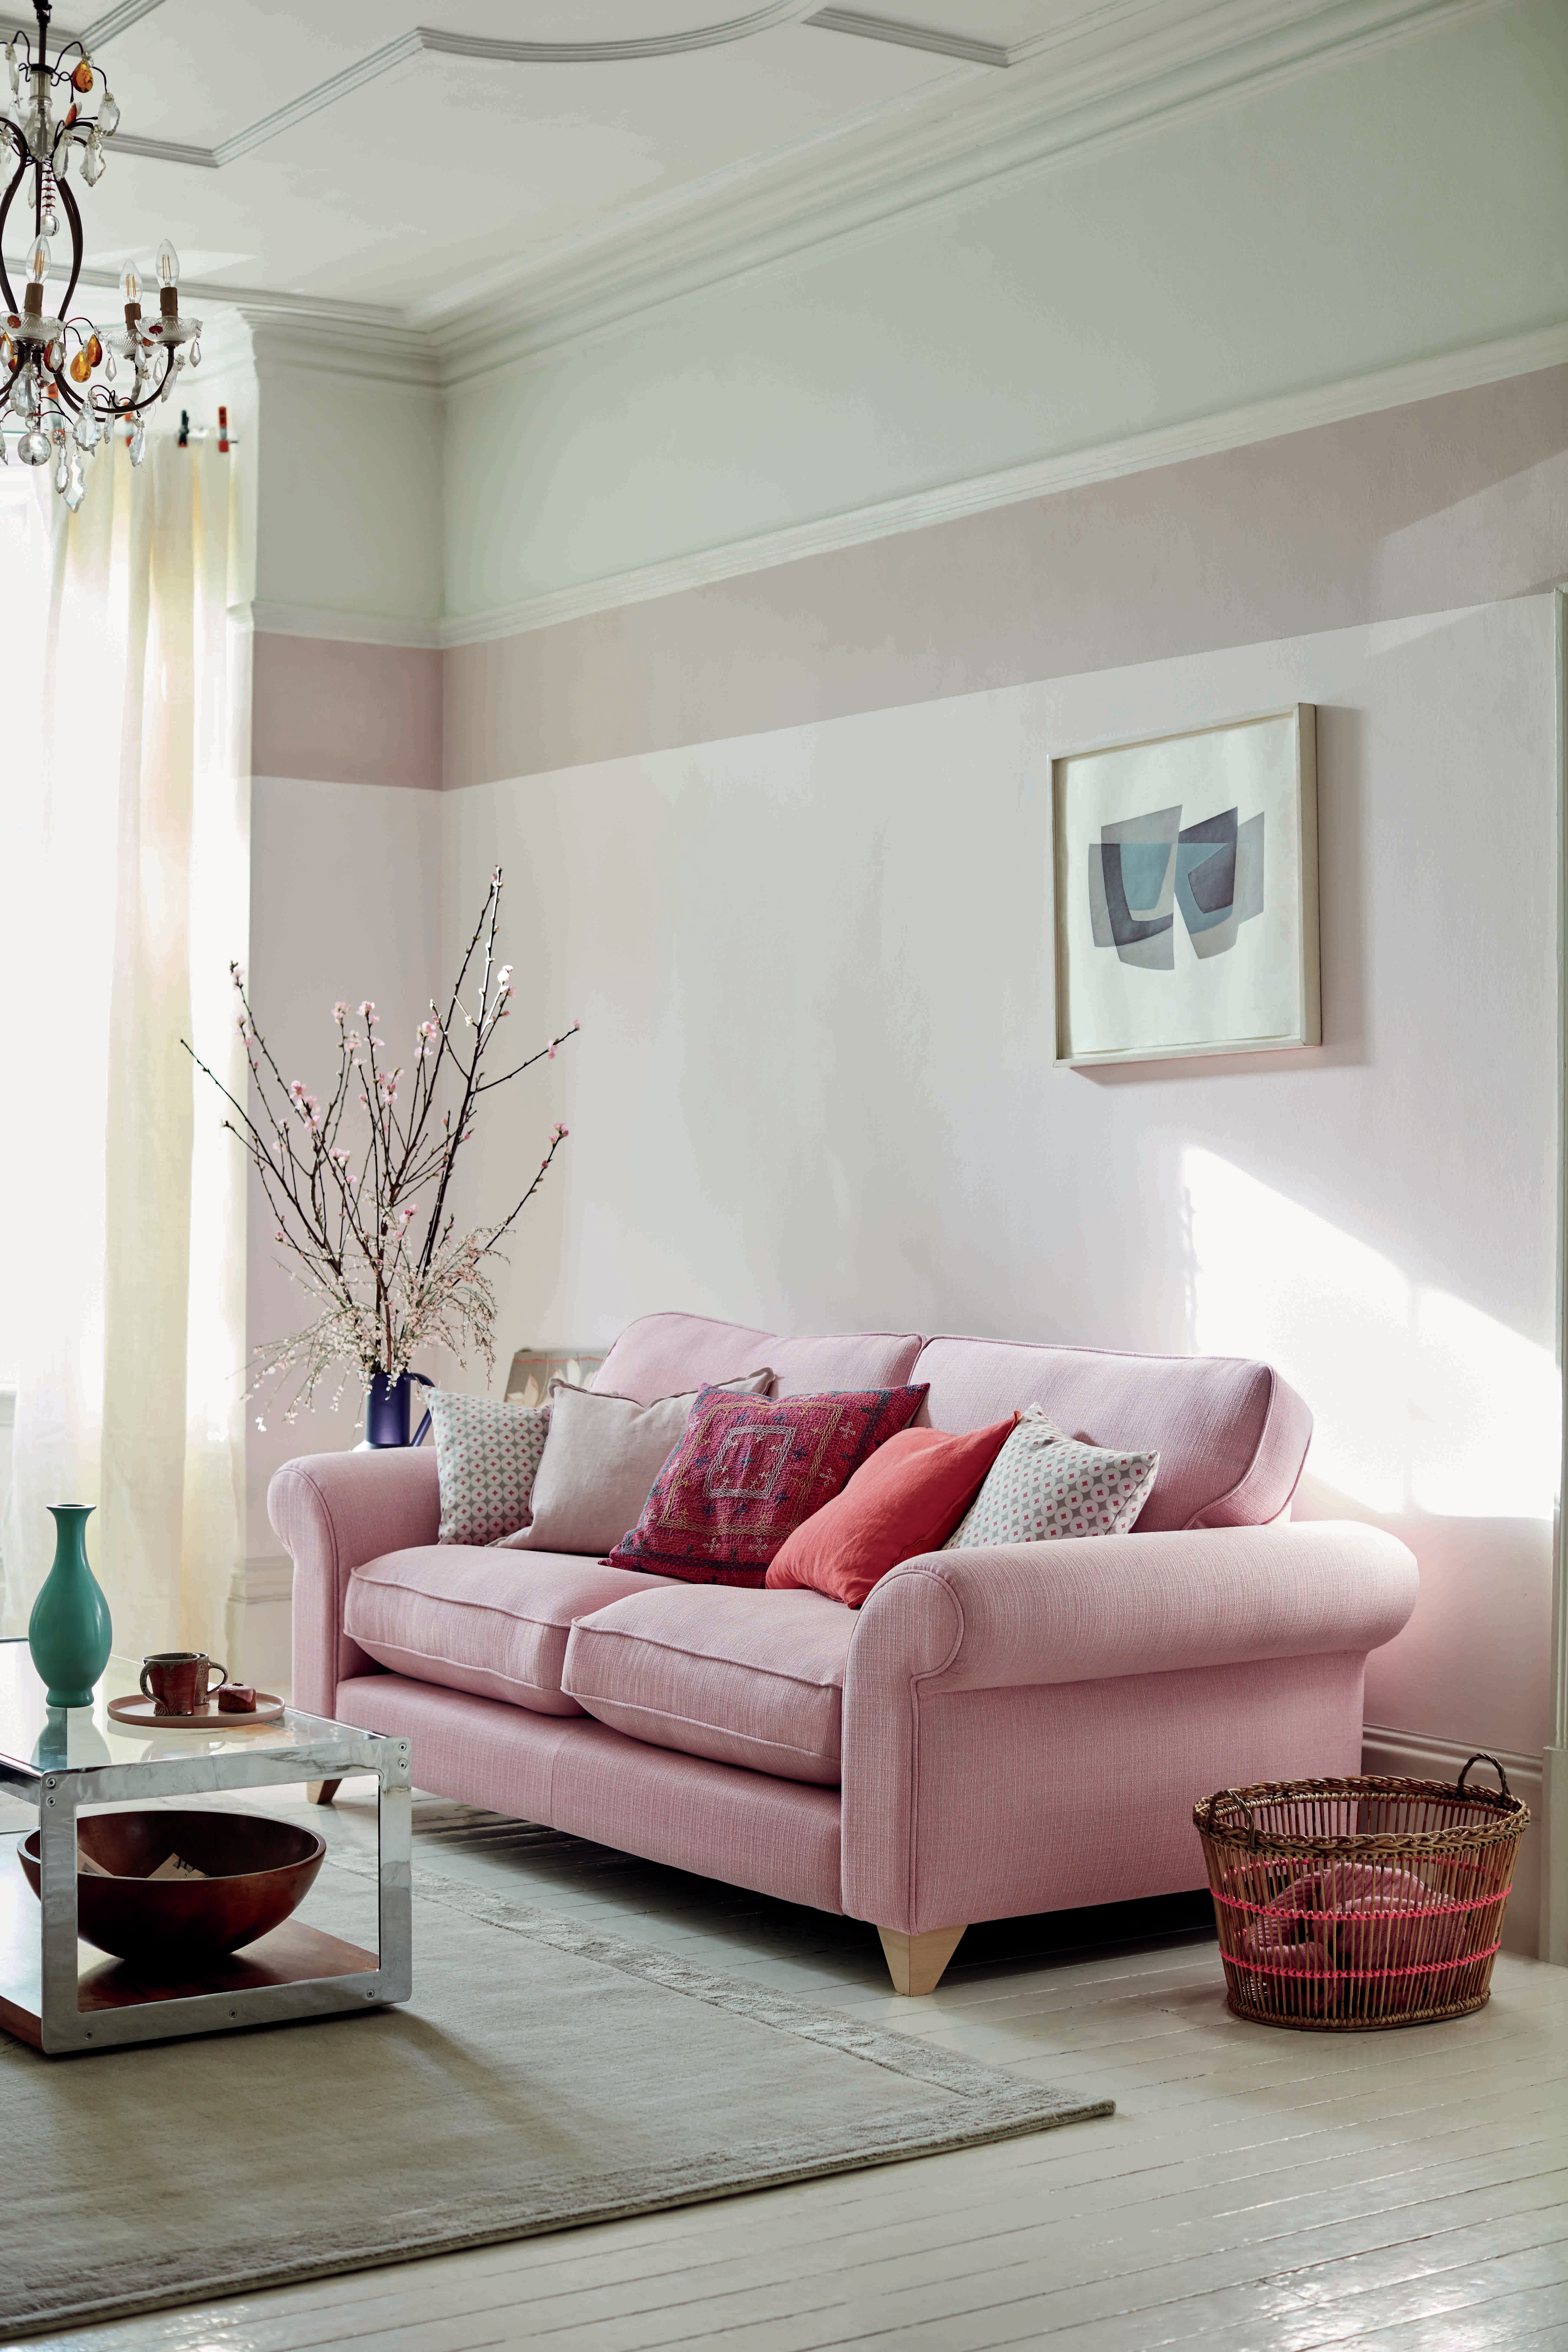 Discover how to pick the best paint colours for every tricky room like living rooms, living spaces, family rooms and neutral spaces in your home with expert advice from Interior Stylist Maxine Brady with pink paint colours, blue interiors